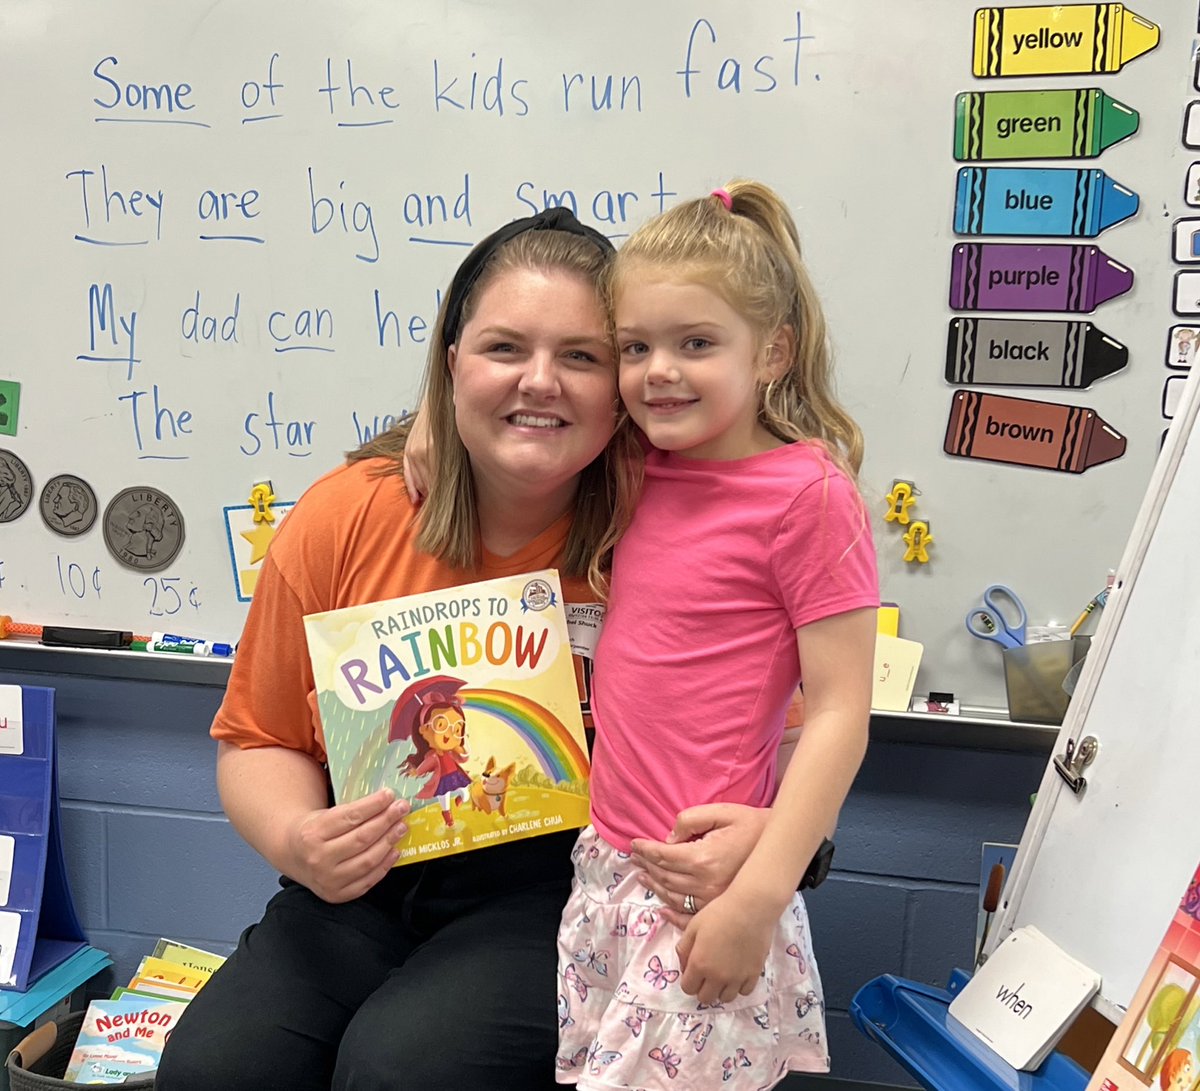 Foundation staff member Rachel got to be the mystery reader in her daughter’s kindergarten class today & read one of her favorite @dollyslibrary books, “Raindrops to Rainbow!” Learn how you can support this amazing program at smef.org/dolly